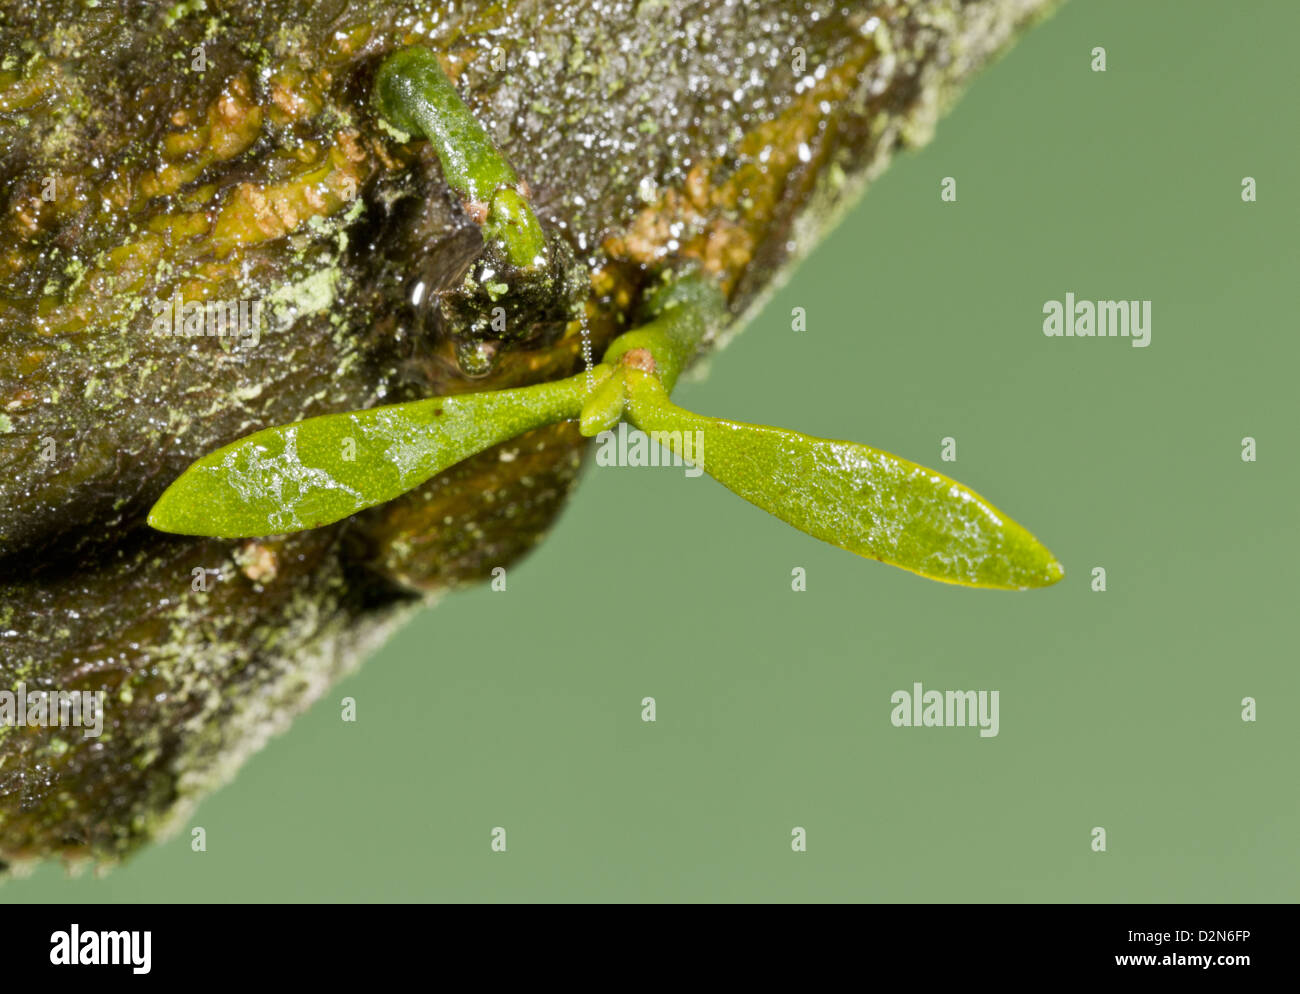 Very young seedling of Mistletoe (Viscum album) with seed-leaves growing on apple bark, close-up, Dorset, England, UK Stock Photo